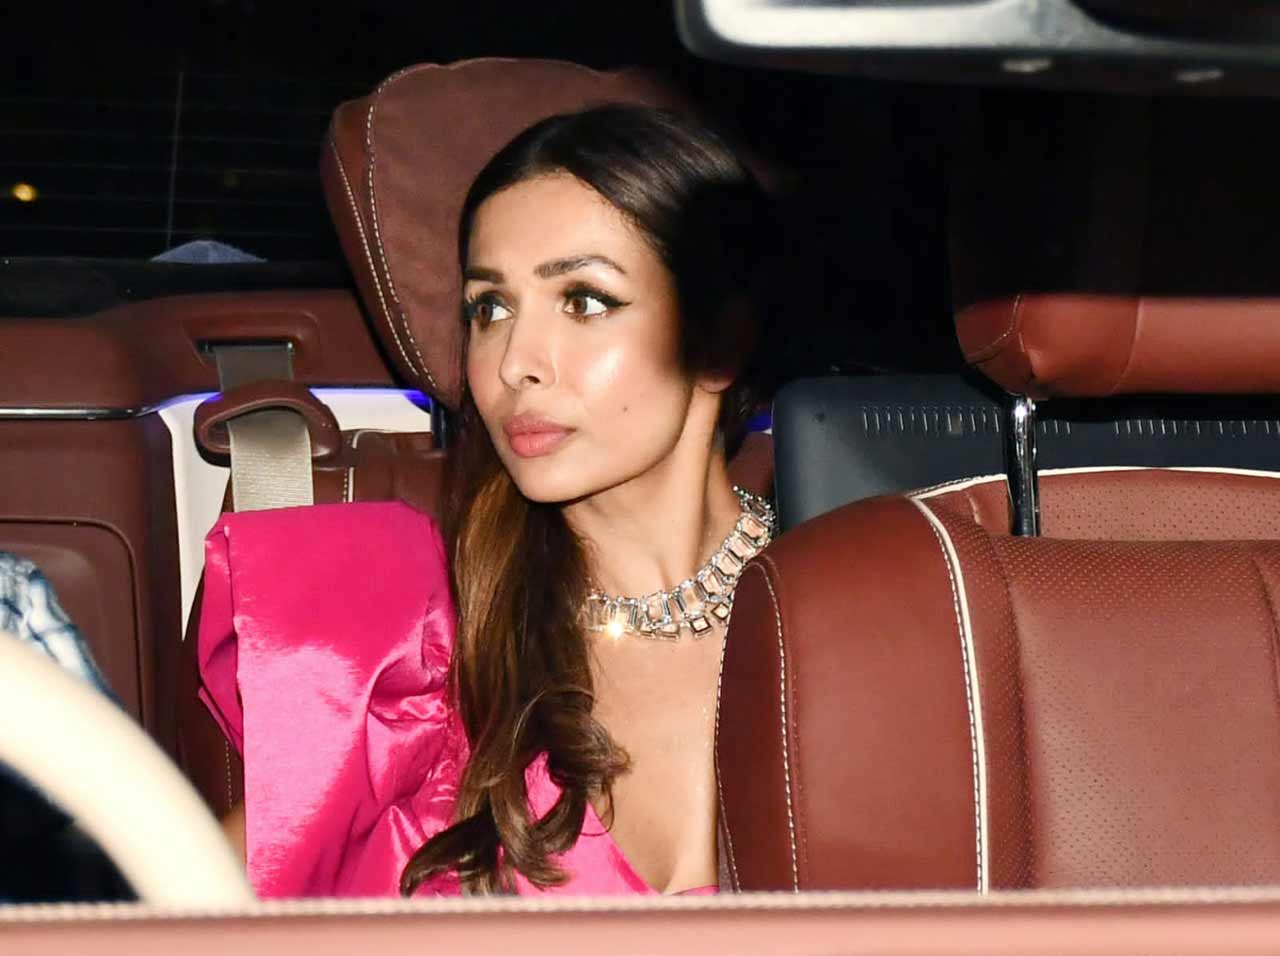 Malaika Arora stunned in a Fuschia pink outfit as she attended the bash with beau Arjun Kapoor.